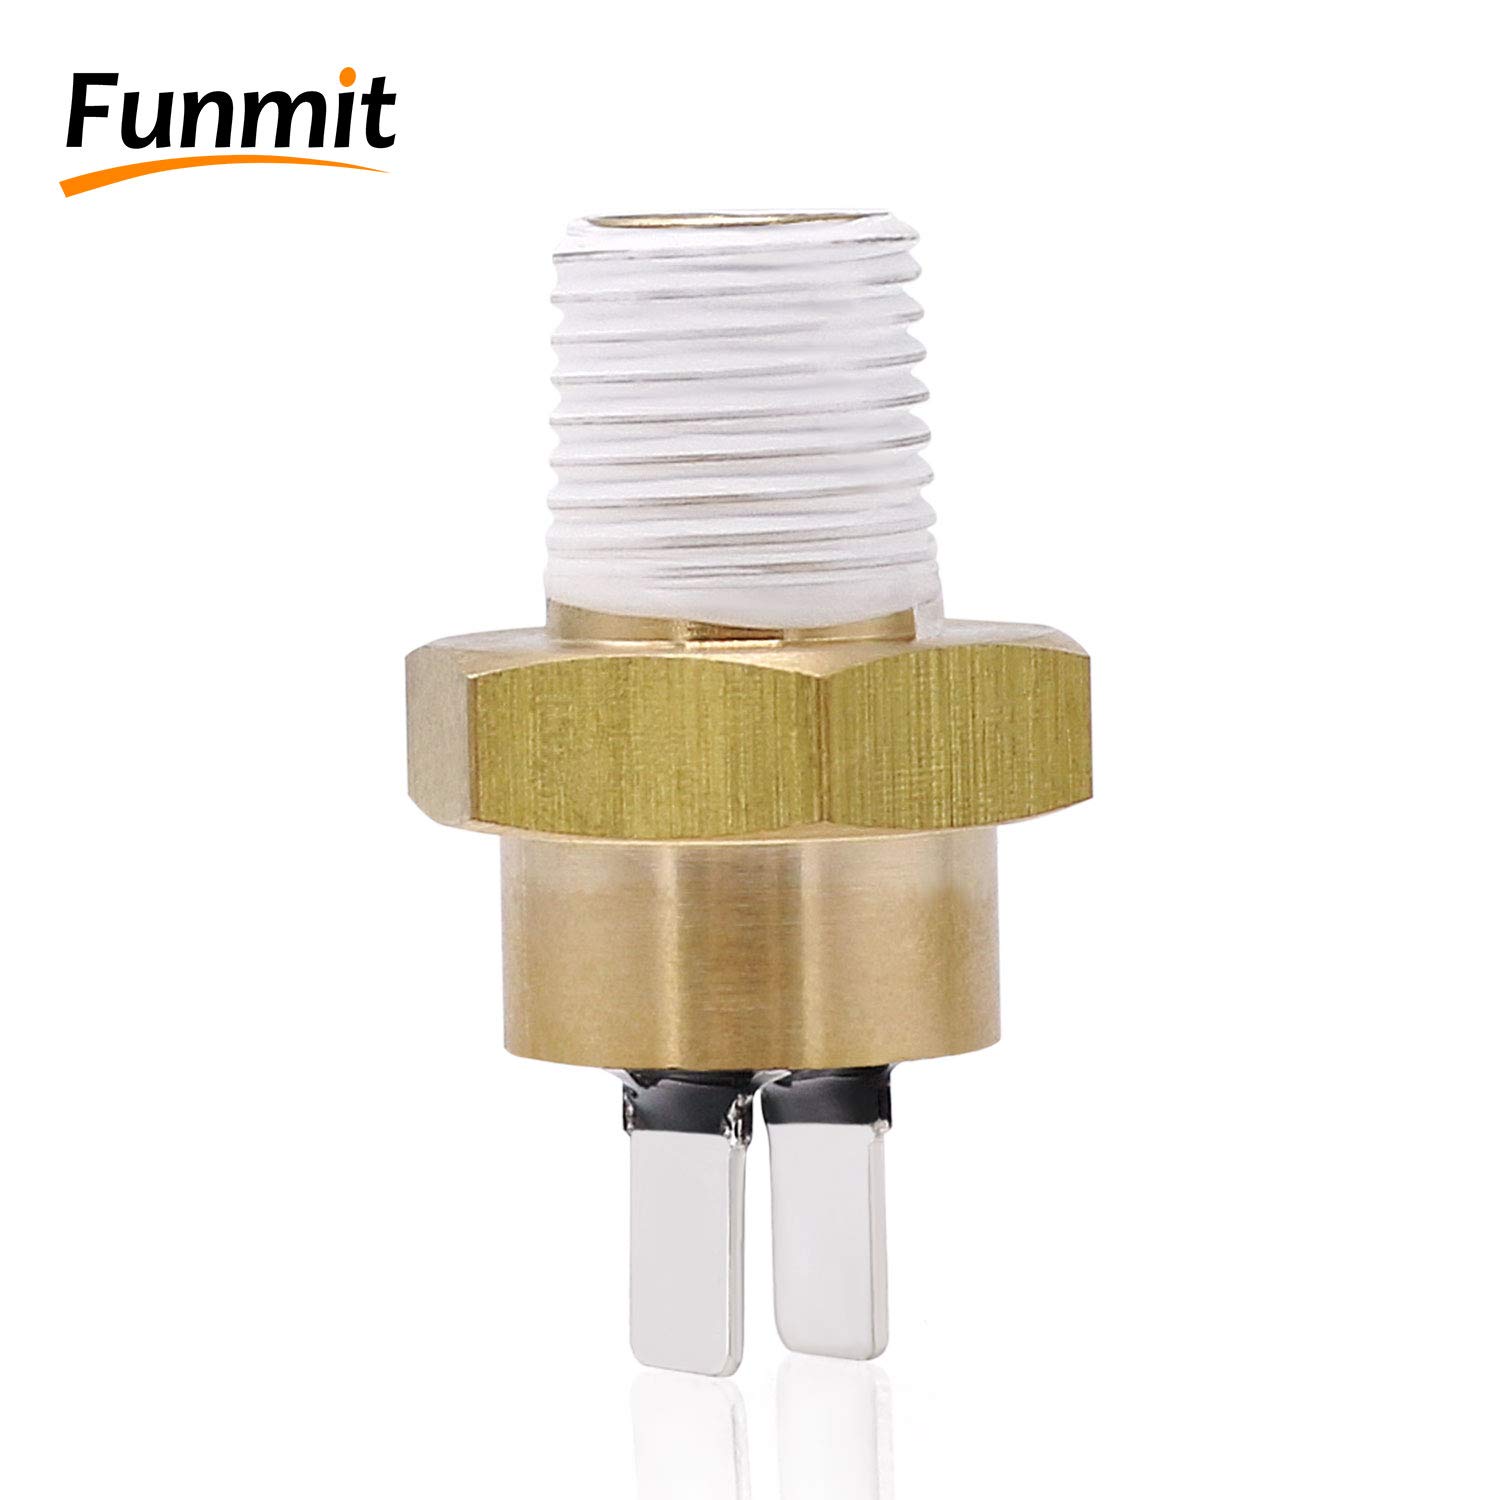 Funmit 42001-0063S High Limit Switch Replacement for Pentair Sta-Rite MasterTemp Max-E-Therm Pool/Spa Heater Elecrical System